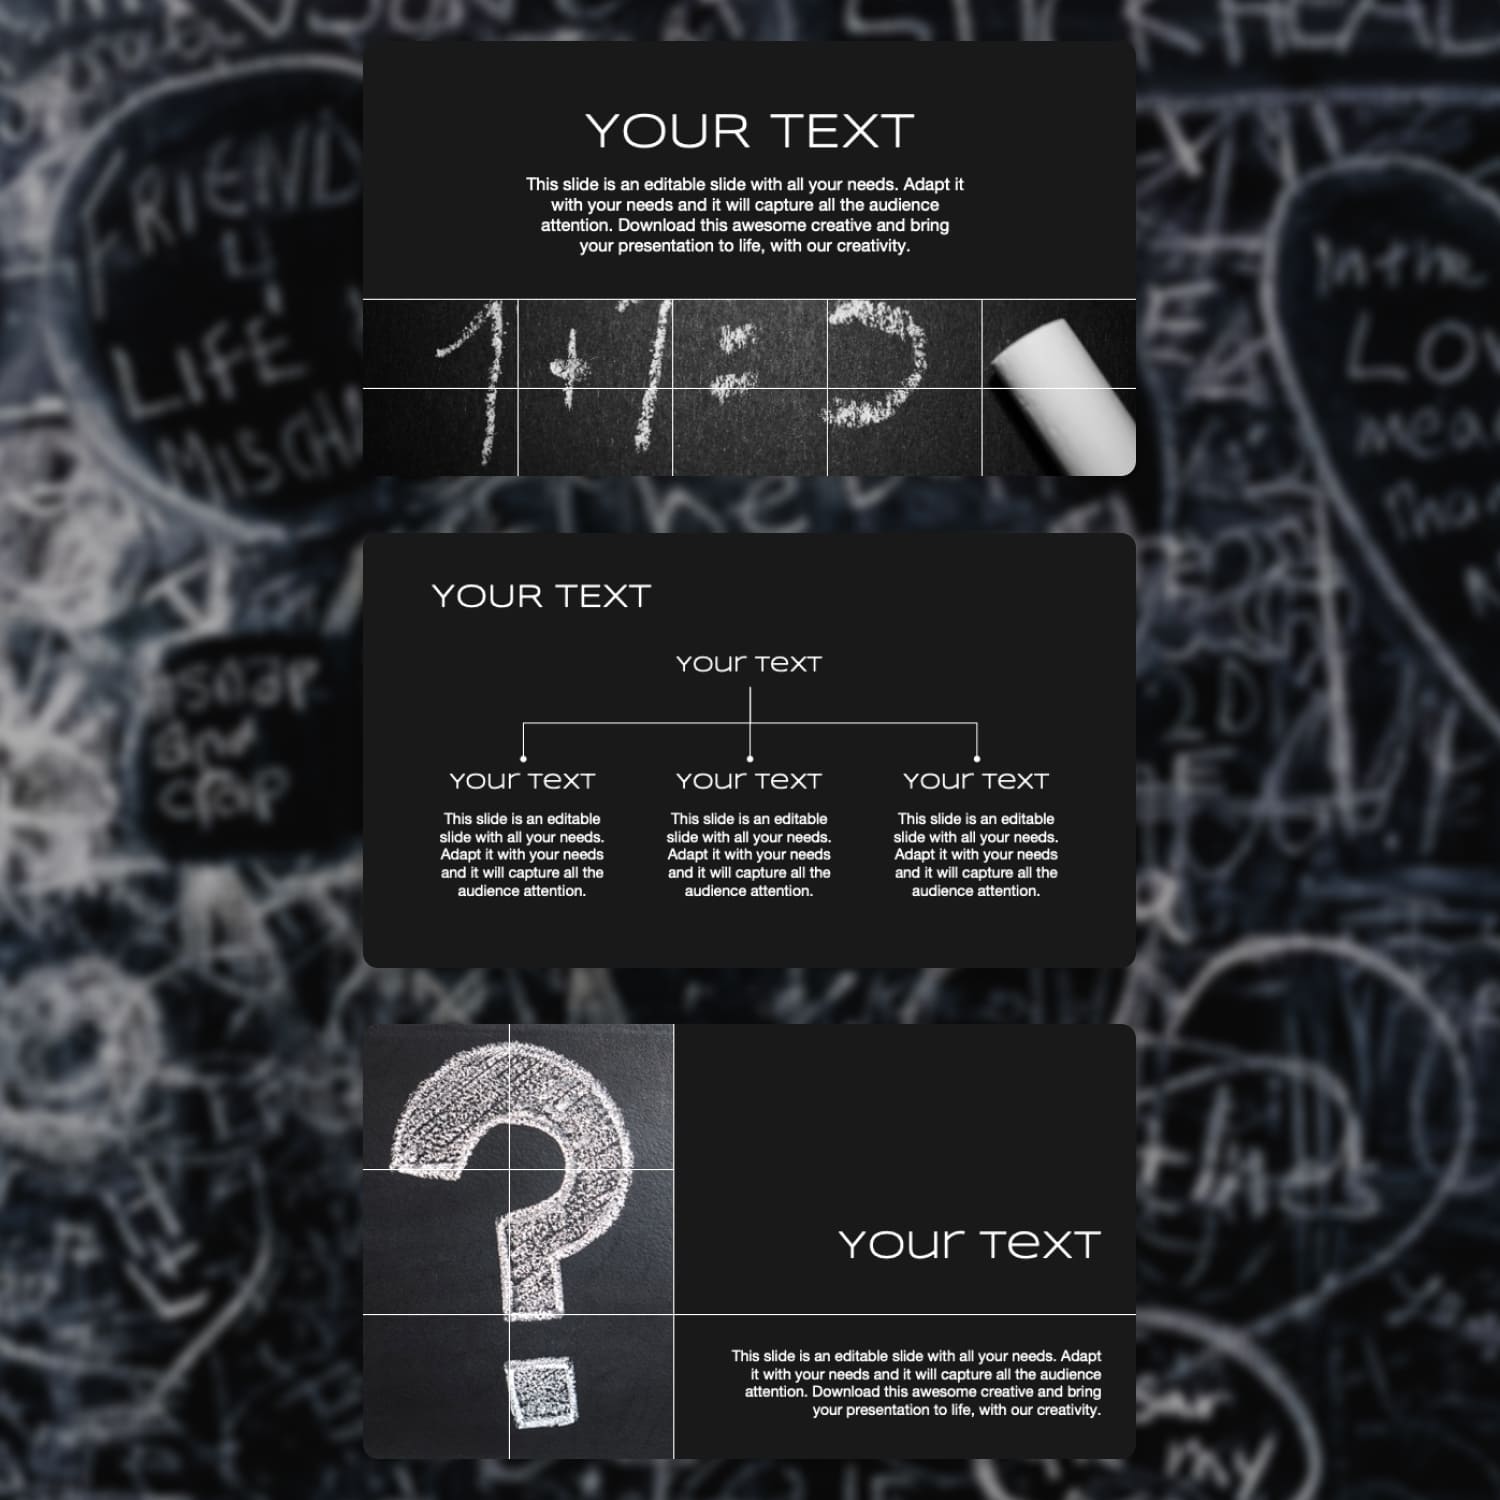 Chalkboard Powerpoint Template Cover.